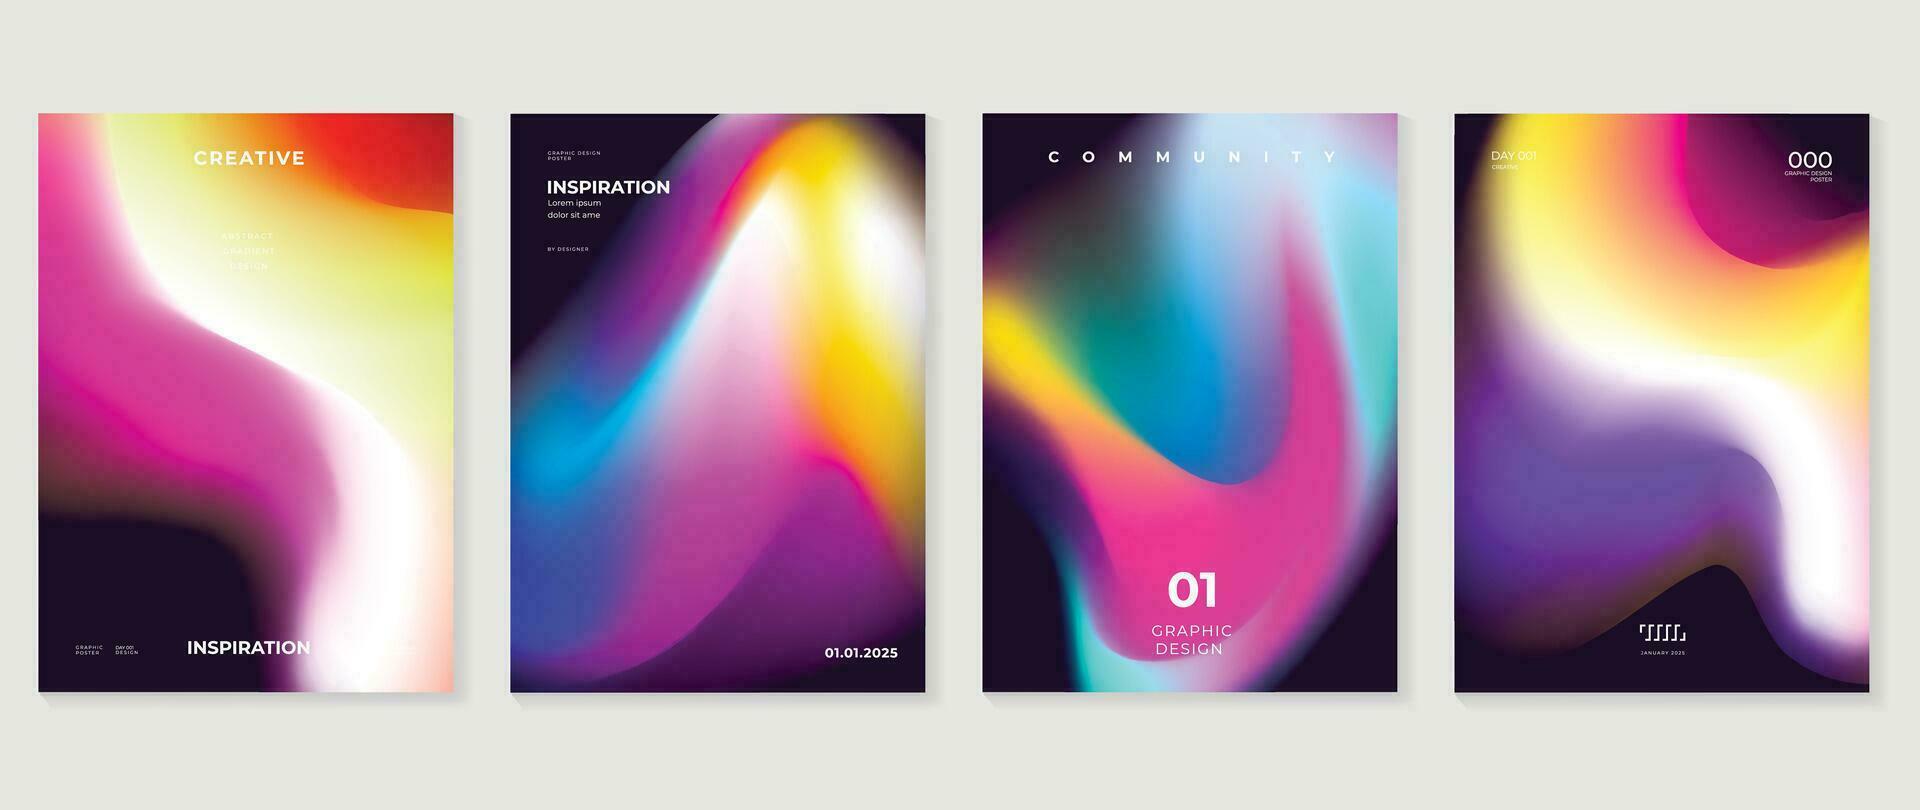 Gradient banner design background. Abstract gradient graphic with vibrant liquid gradient mesh. Futuristic business cards collection illustration for flyer, brochure, invitation, social media. vector